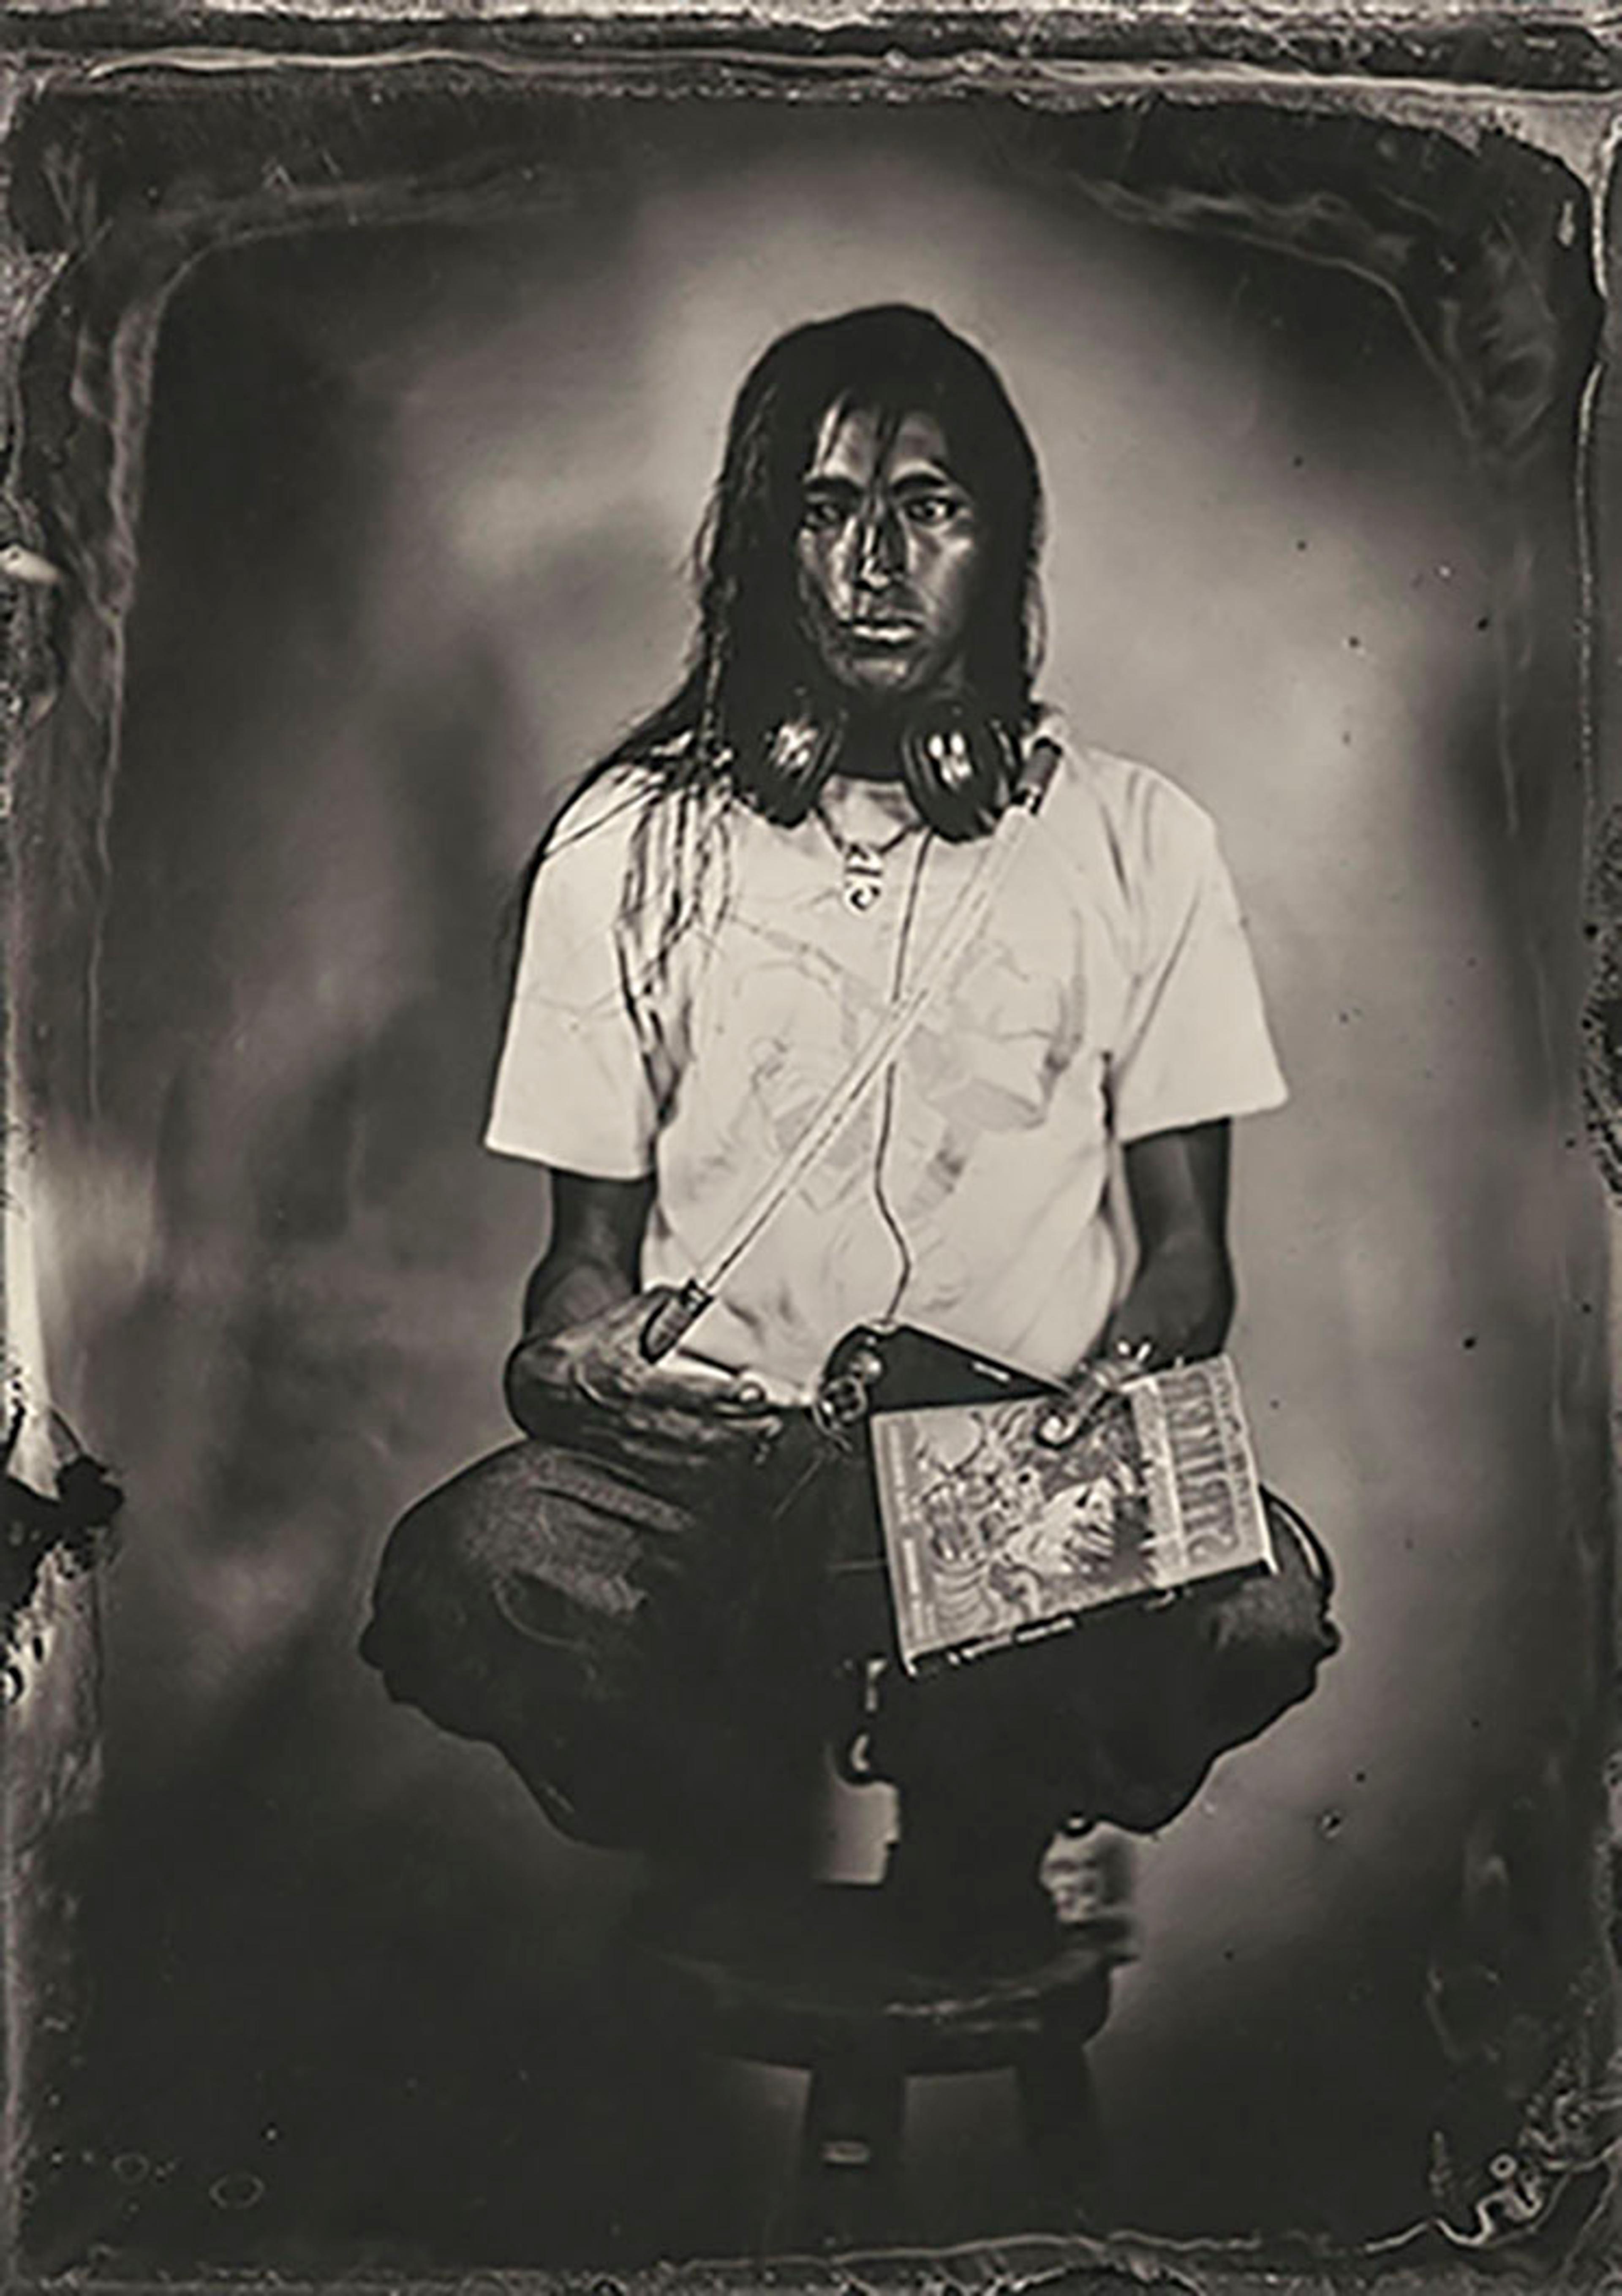 Will Wilson  Selection of 17 works from the Critical Indigenous Photographic Exchange (CIPX) project